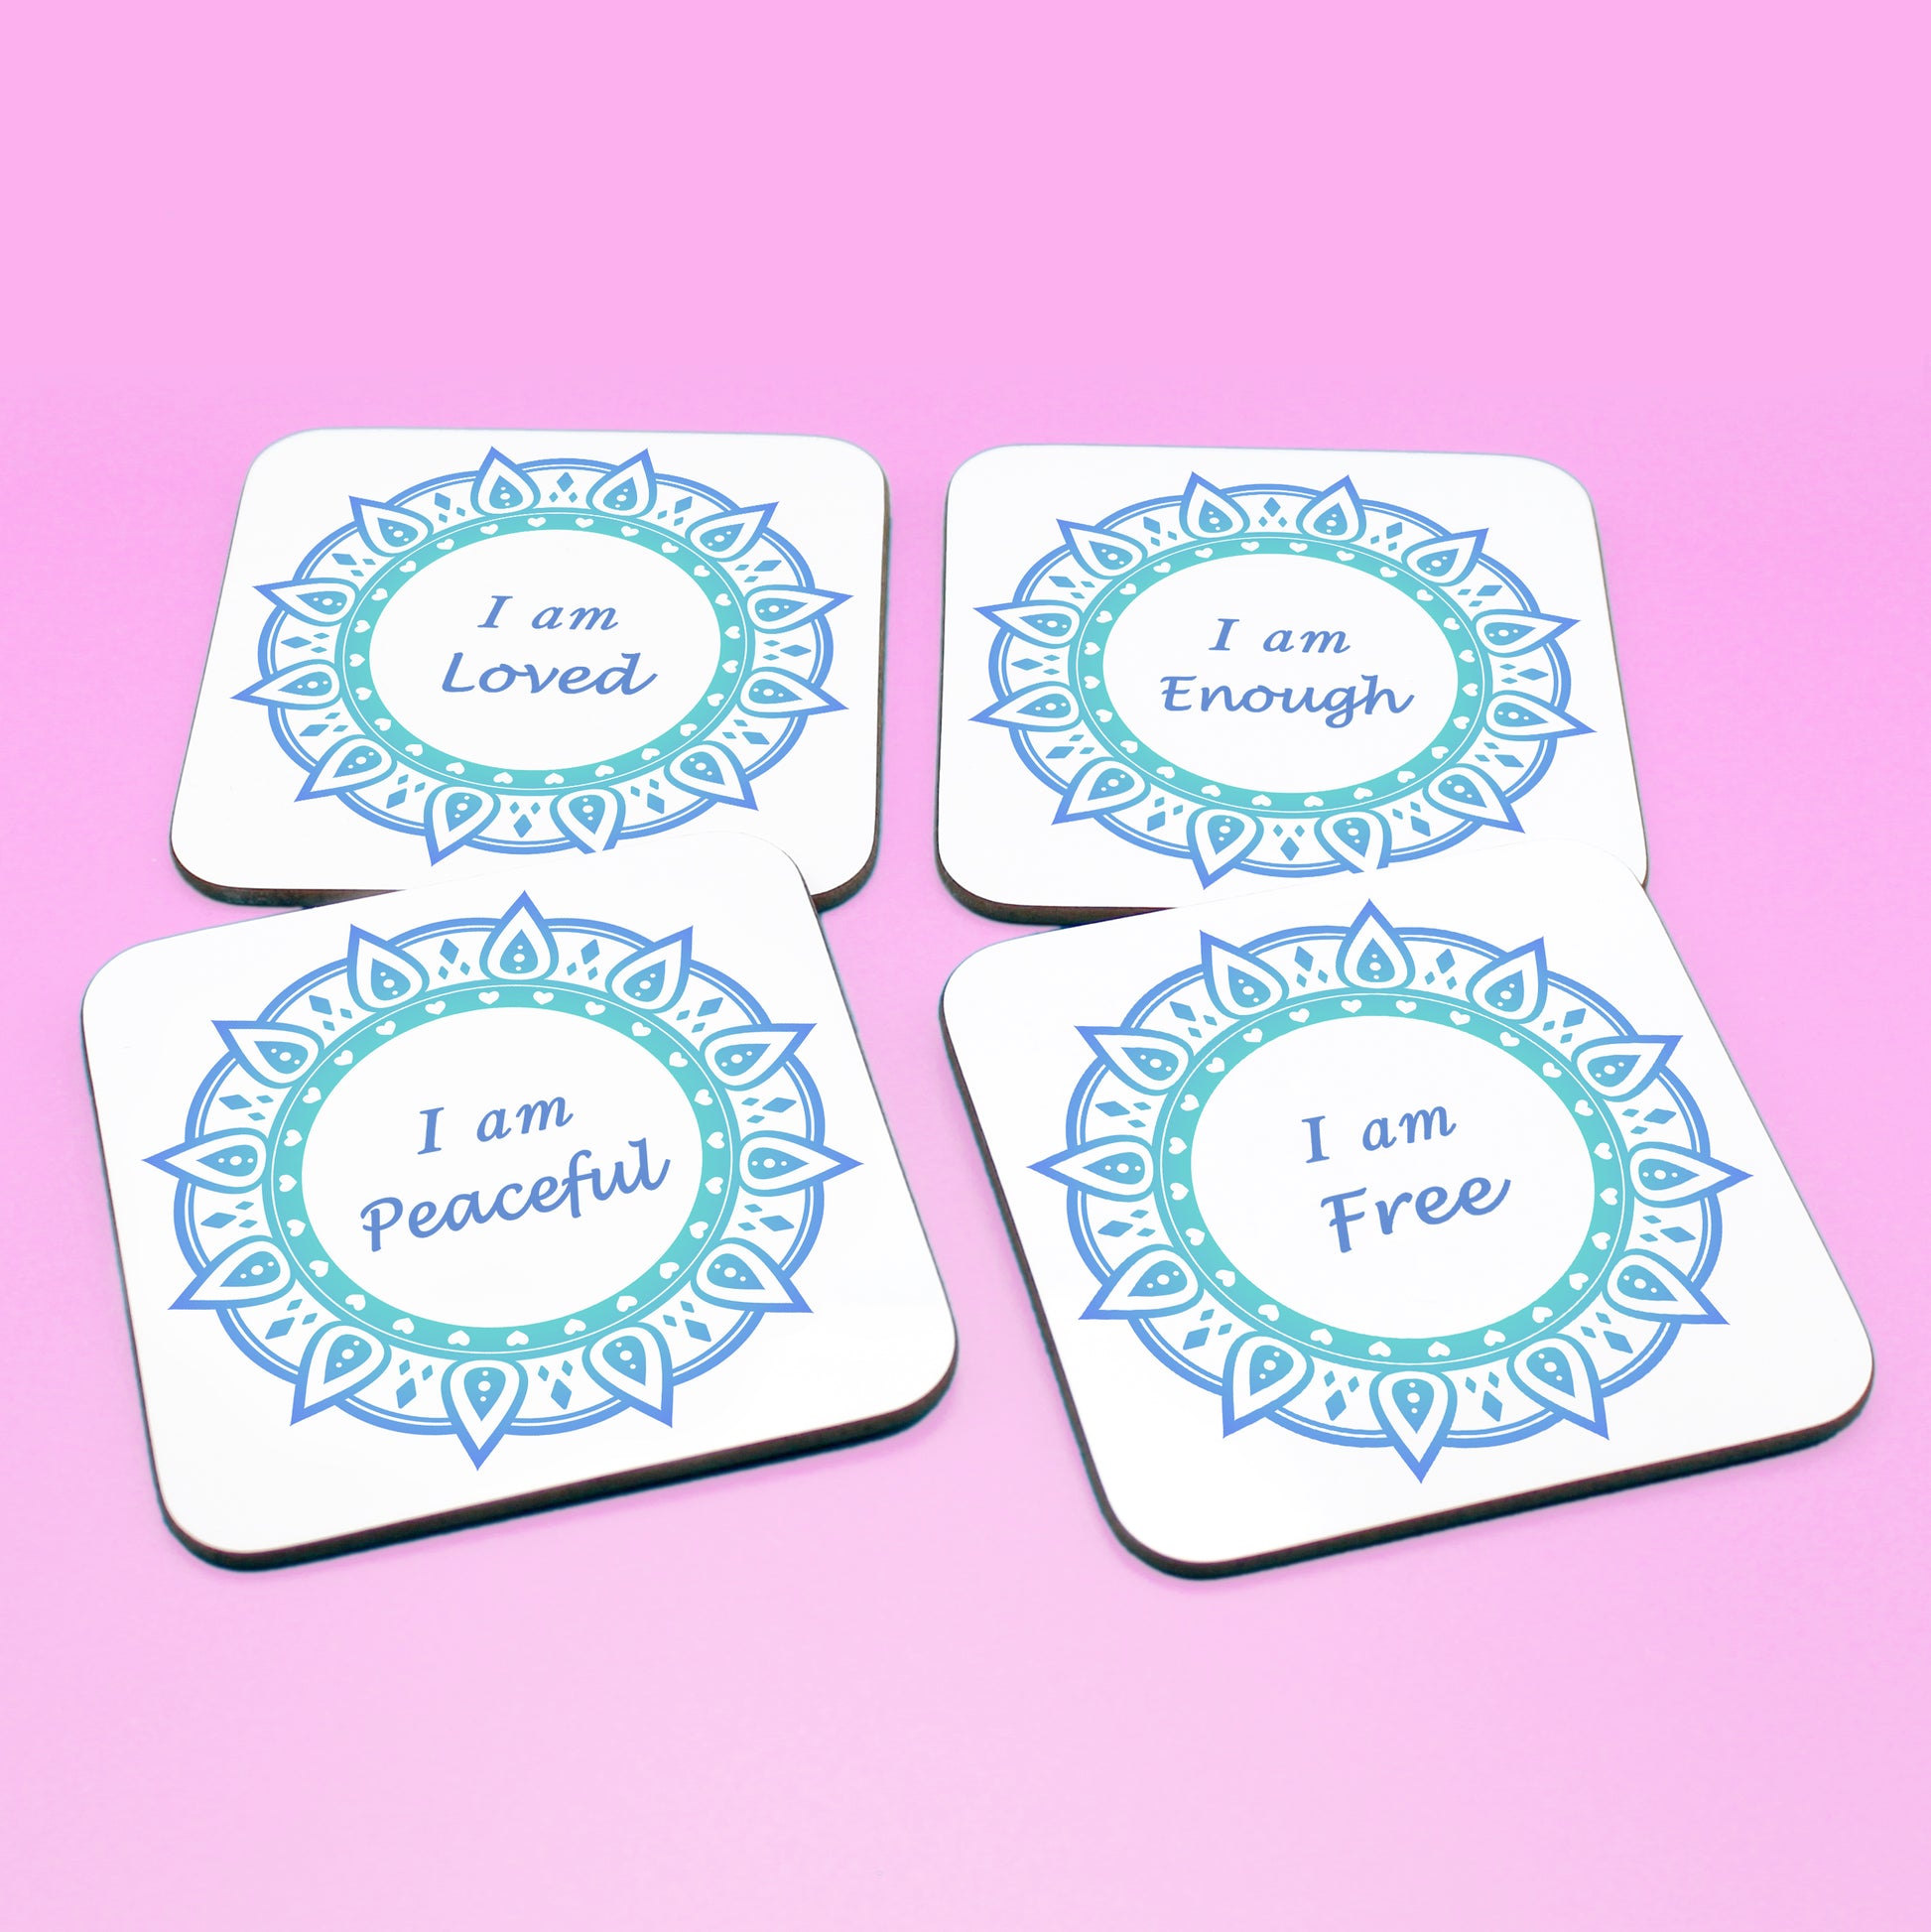 Wellbeing gift. Four square wooden backed personal affirmations coaster set. Theme is Letting Go in this set of four. Mandala design with daily affirmation wording inside the mandala.  Affirmations read I am Loved, I am Enough, I am Peaceful, I am Free (all coaster mandalas are a blue mandala),